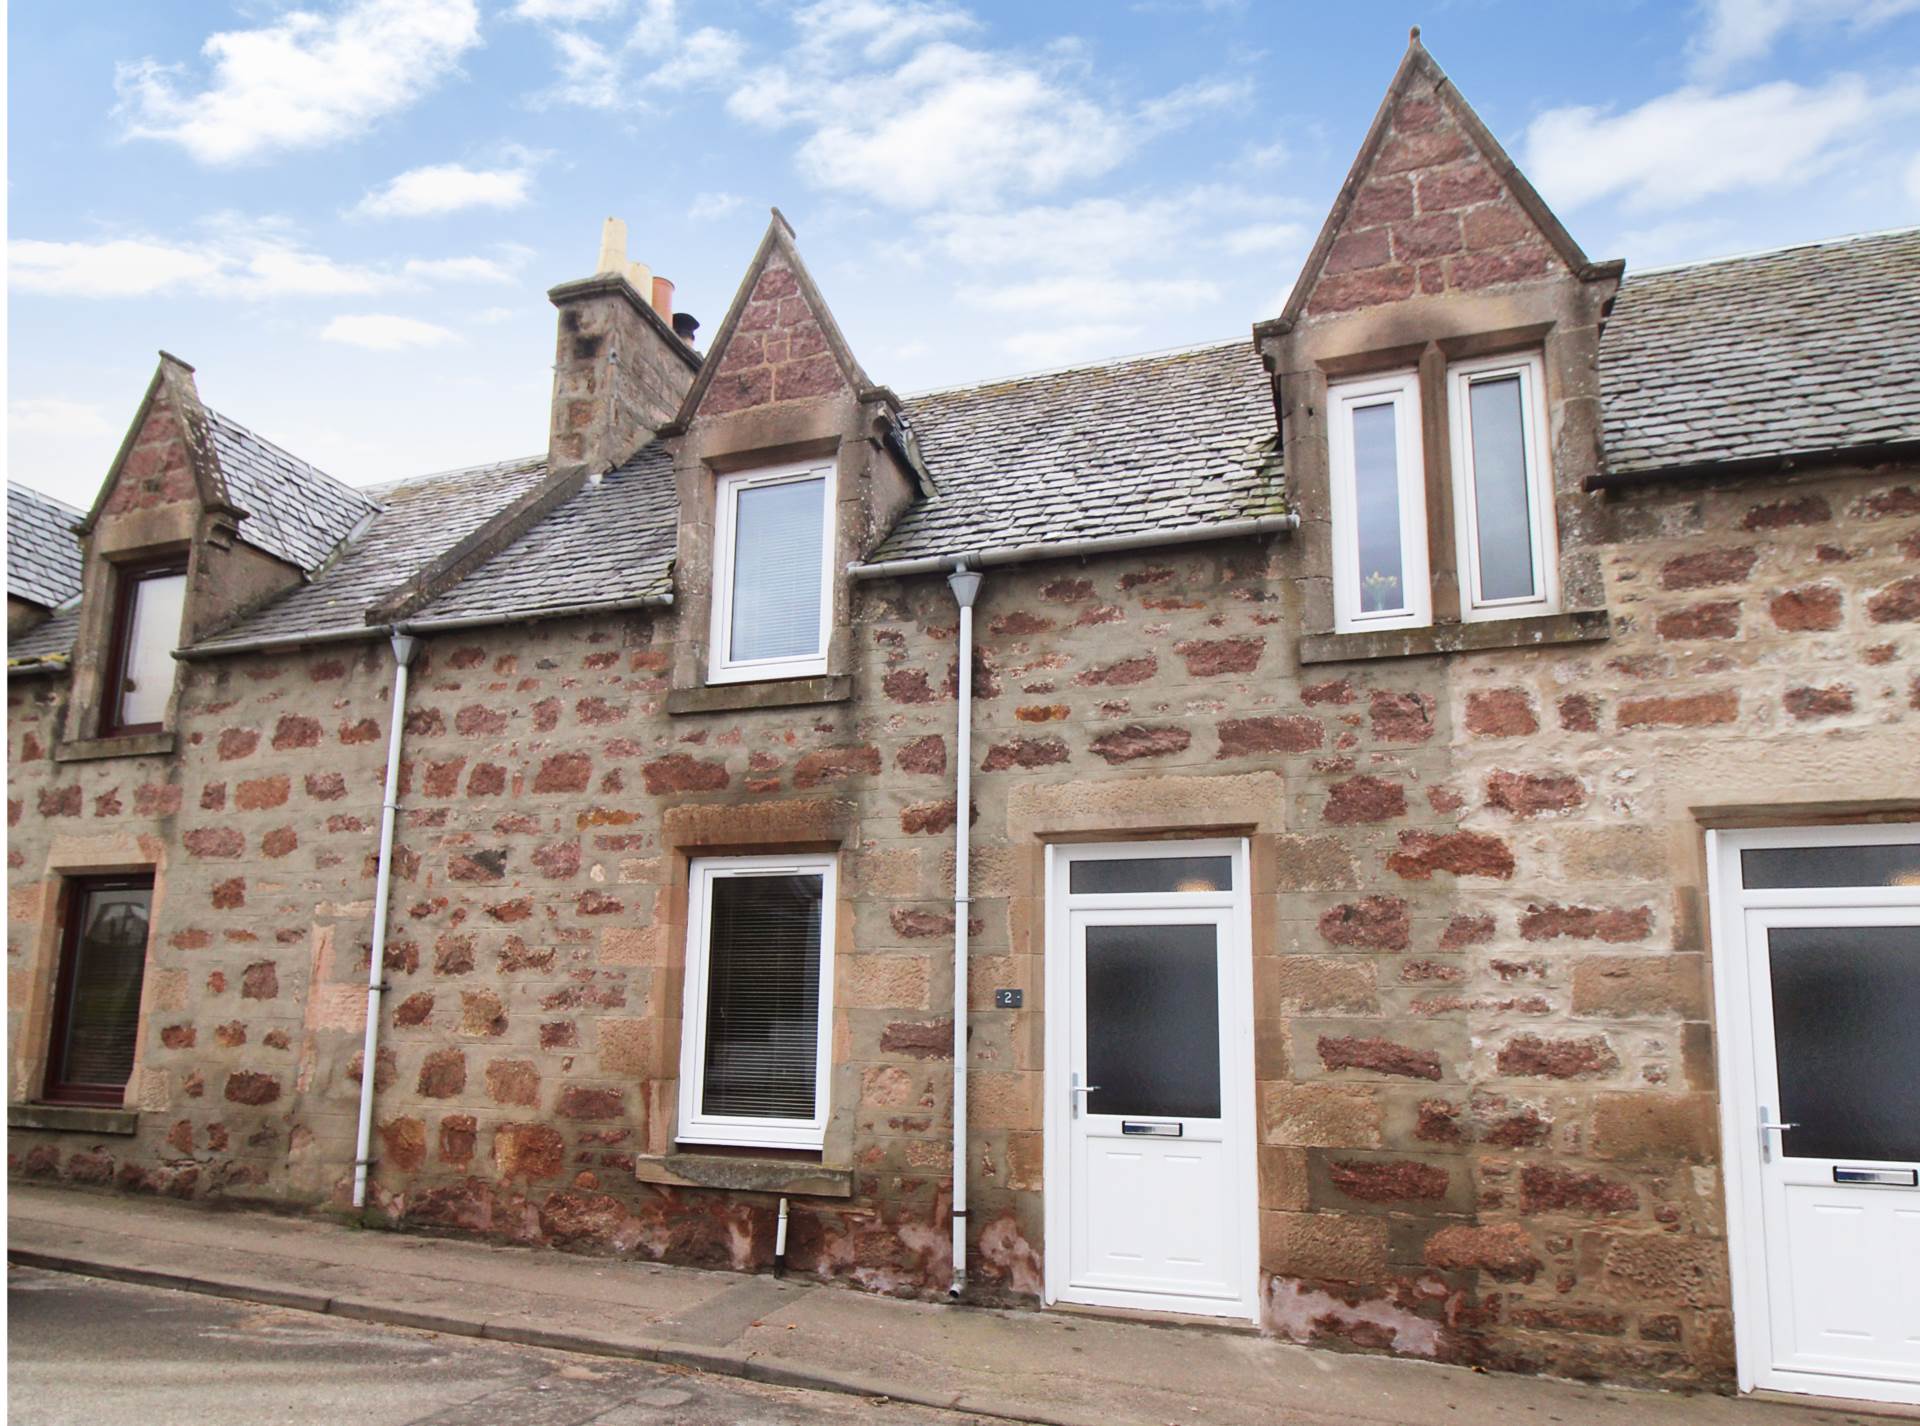 CLOSING DATE SET THURSDAY 28 MARCH AT 12PM West End High Street, Auldearn, Image 1